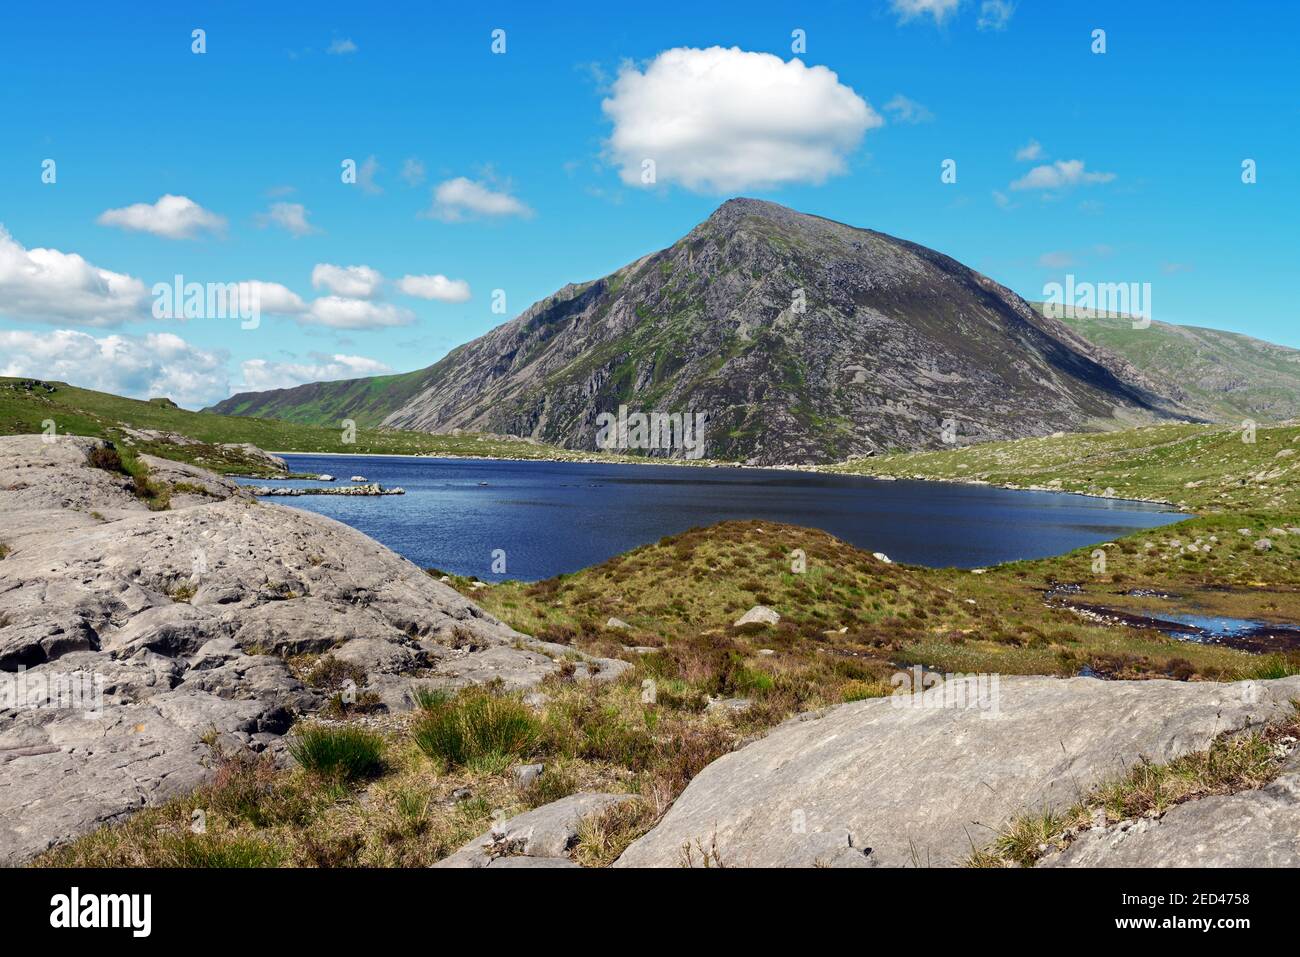 Llyn Idwal is a small mountain lake in the Glyderau mountain range in the Snowdonia National Park, Wales. Pen yr Ole Wen is in the background. Stock Photo